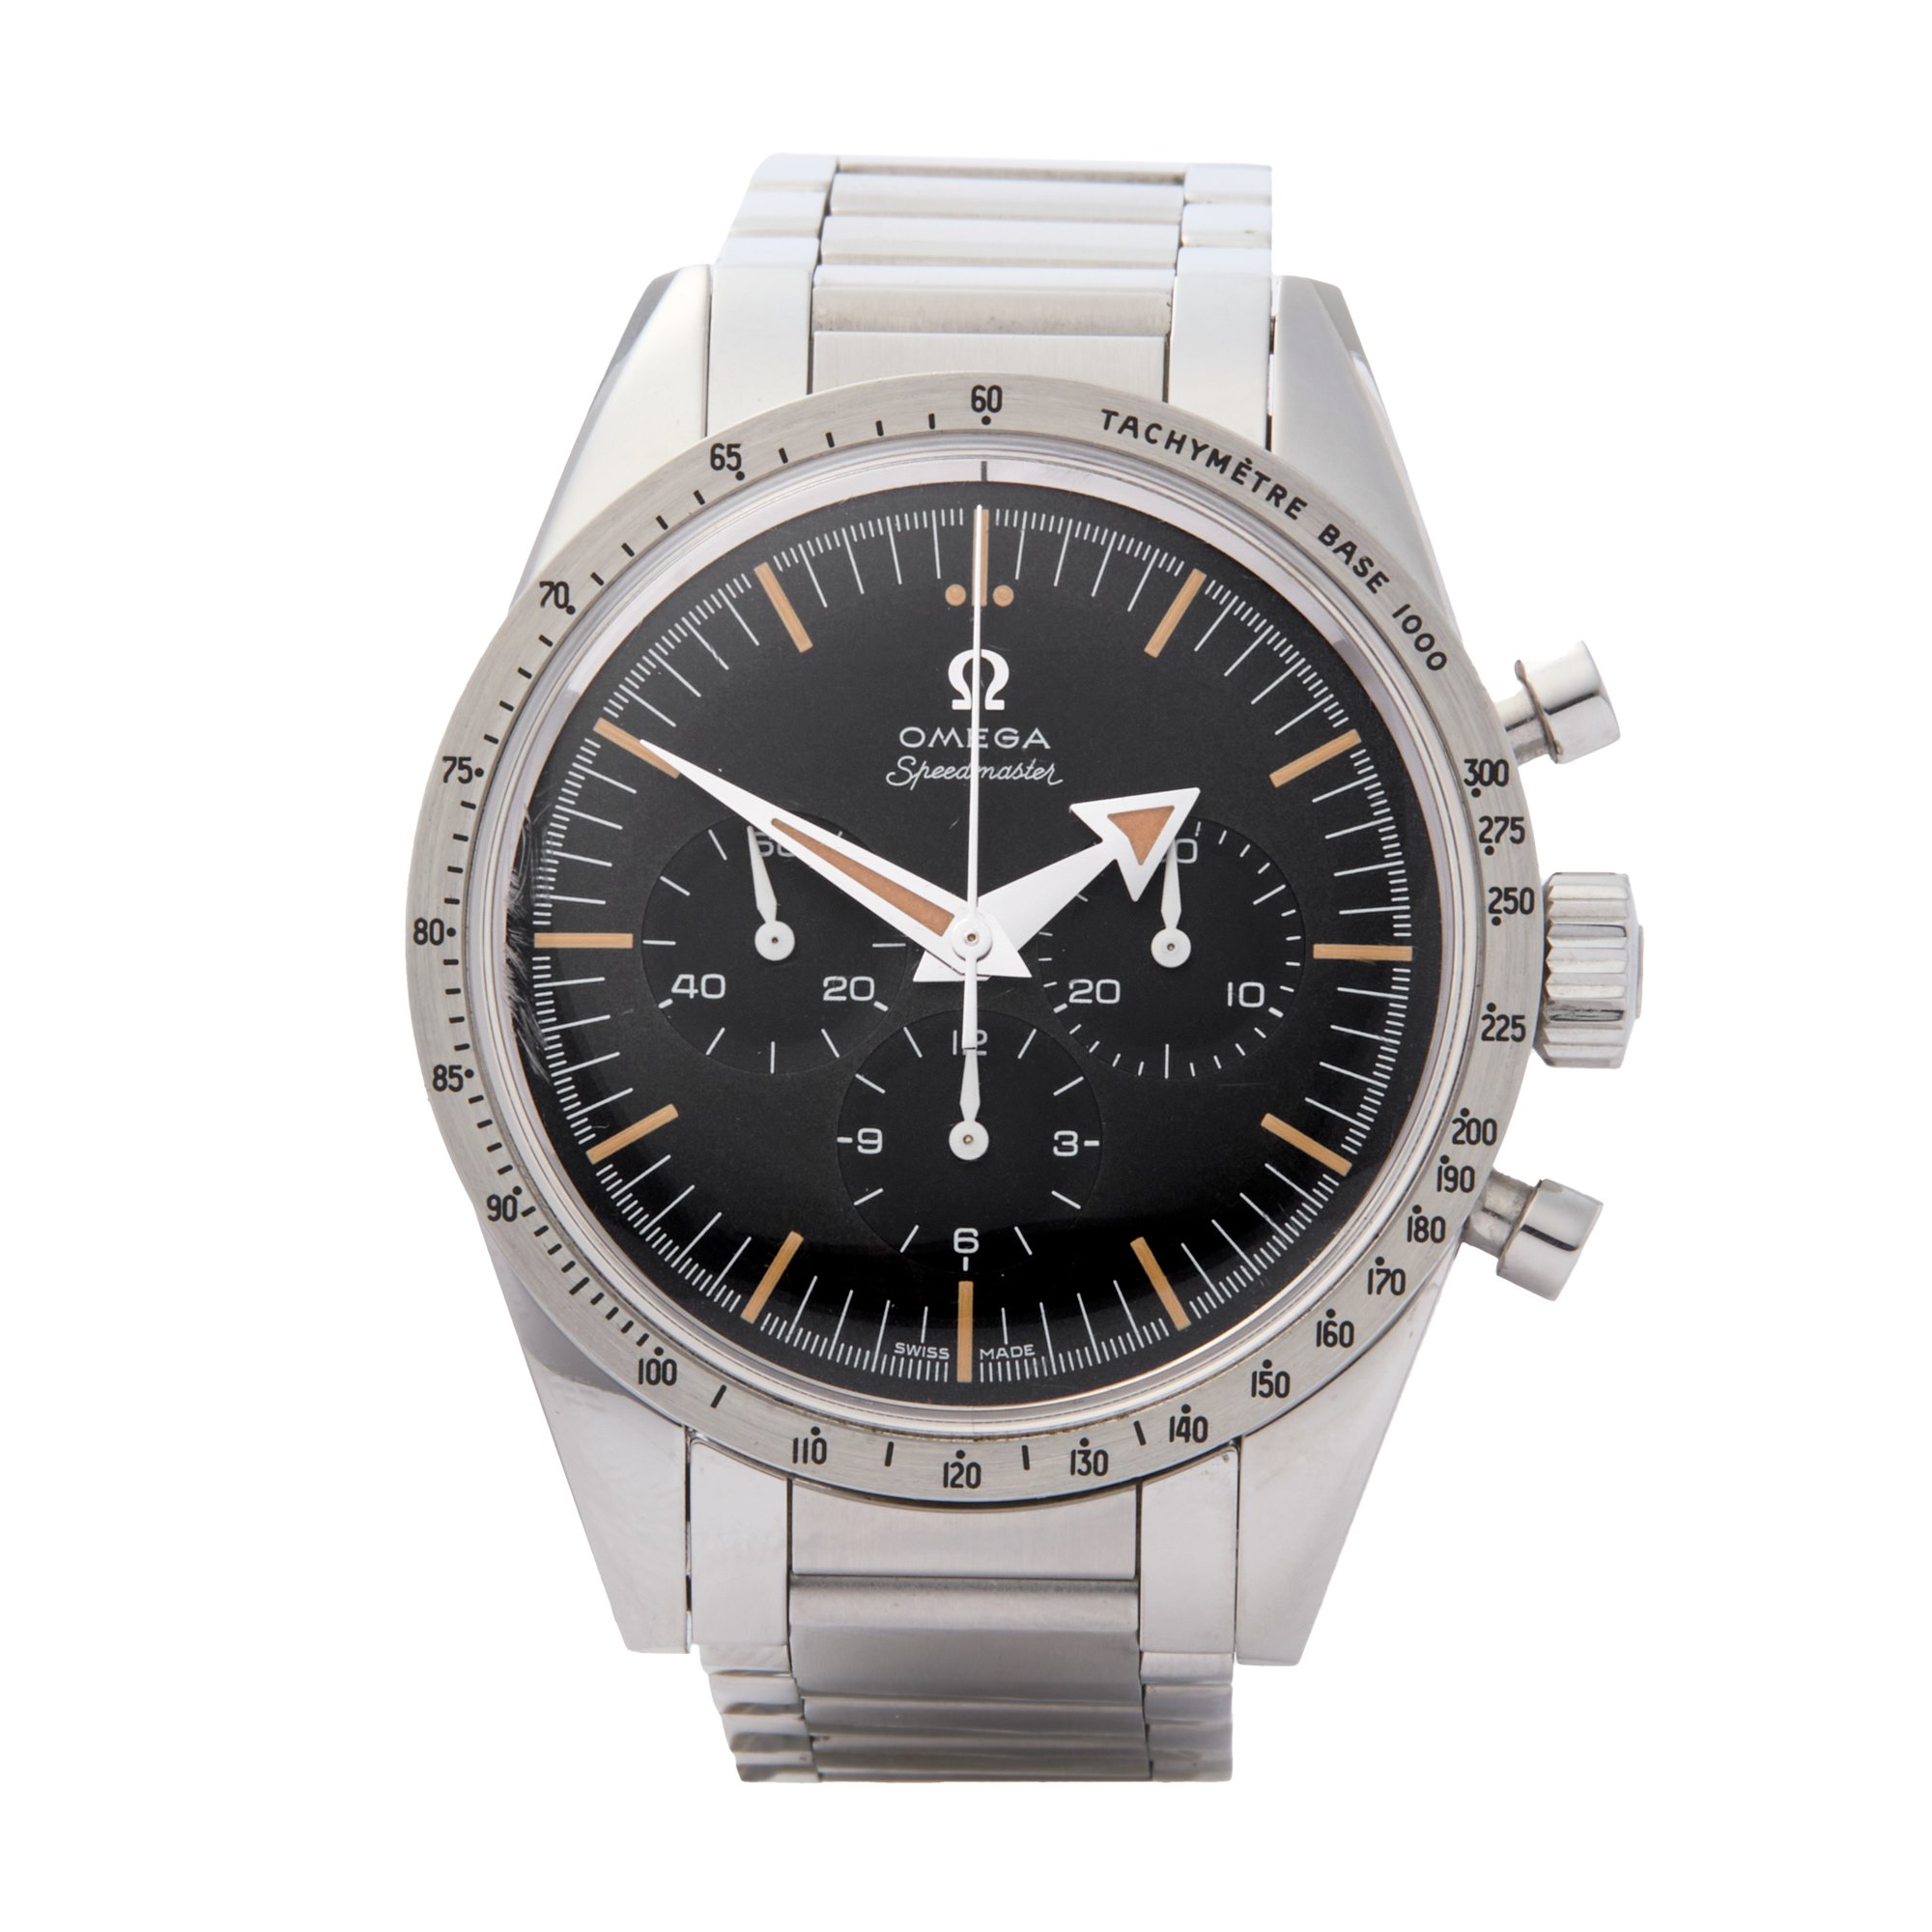 Omega Speedmaster 1957 Trilogy 60th Anniversary Limited Edition Stainless Steel 31110393001001